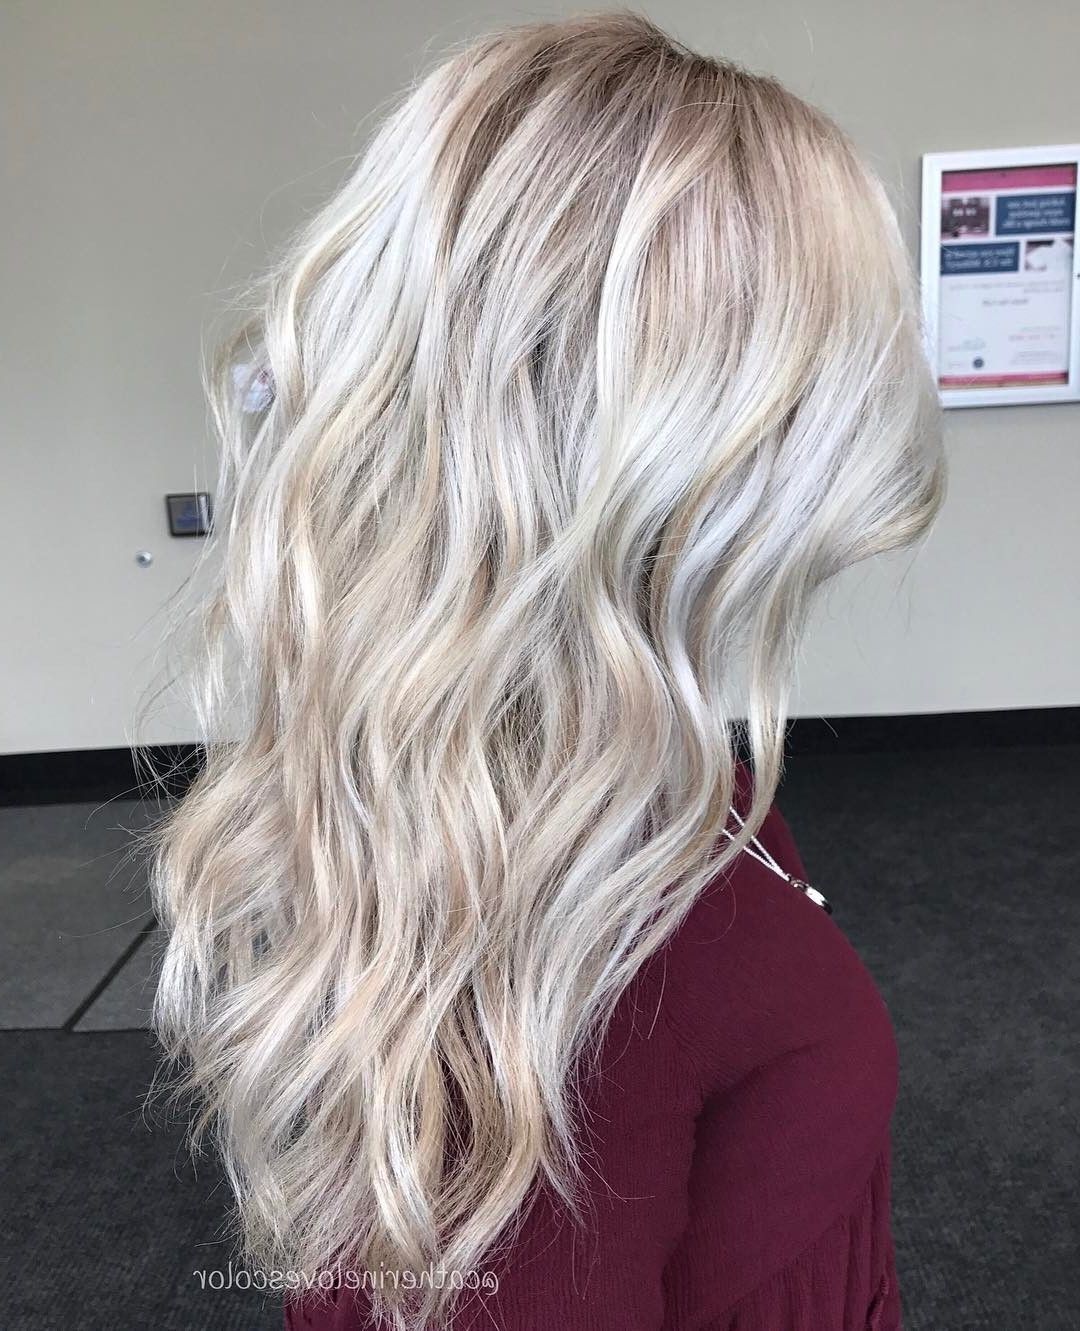 20 Adorable Ash Blonde Hairstyles To Try: Hair Color Ideas 2018 In Popular Warm Blonde Curls Blonde Hairstyles (View 6 of 20)